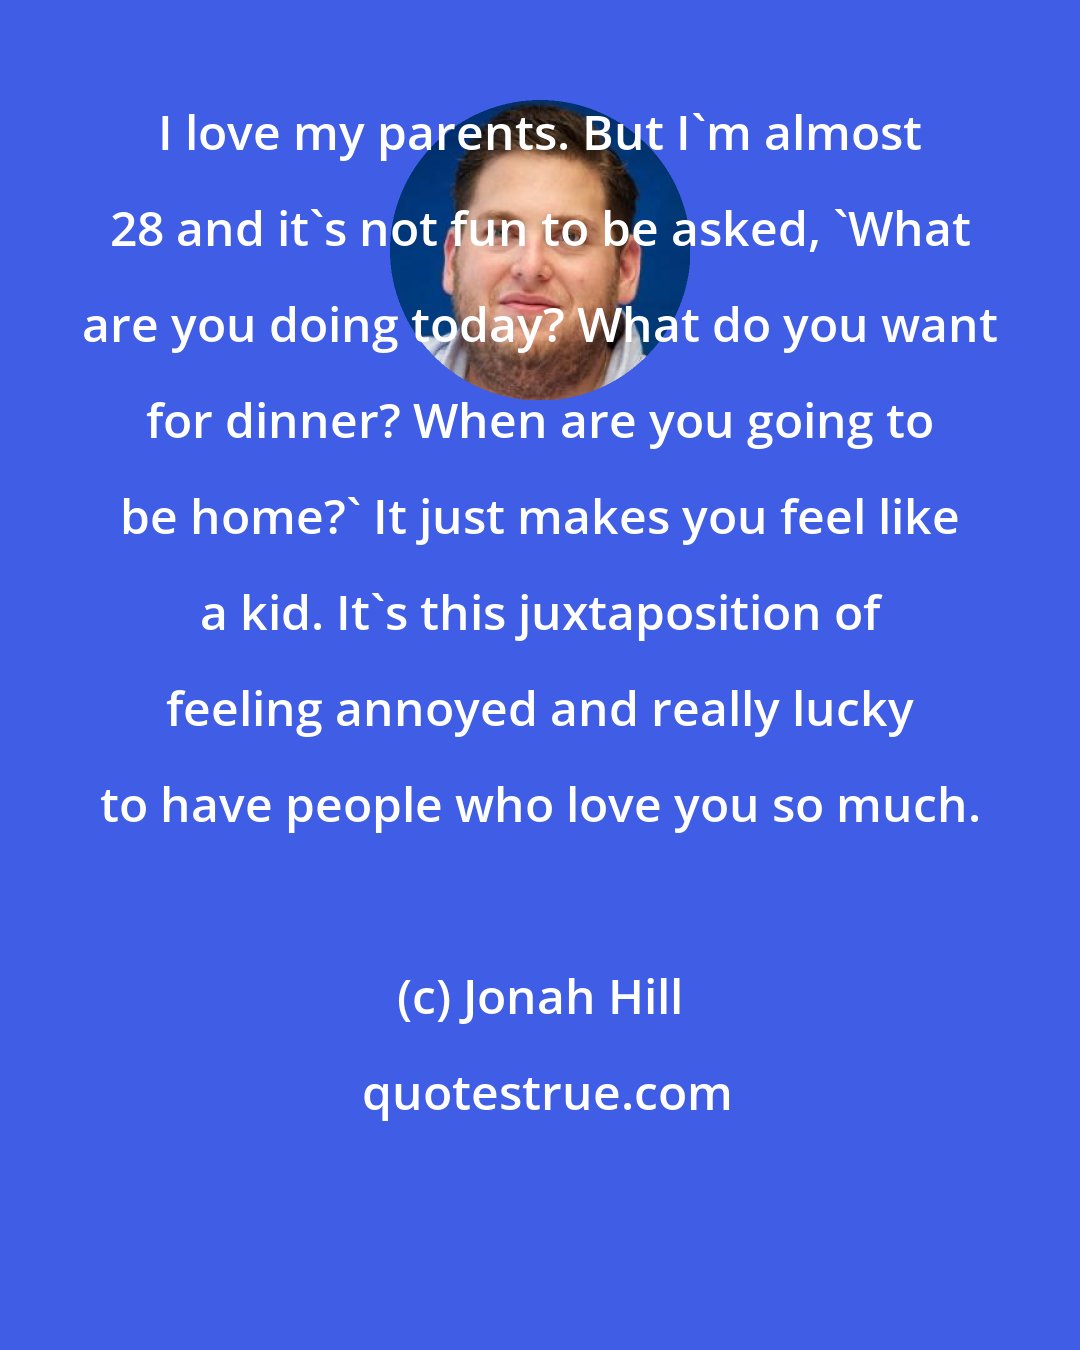 Jonah Hill: I love my parents. But I'm almost 28 and it's not fun to be asked, 'What are you doing today? What do you want for dinner? When are you going to be home?' It just makes you feel like a kid. It's this juxtaposition of feeling annoyed and really lucky to have people who love you so much.